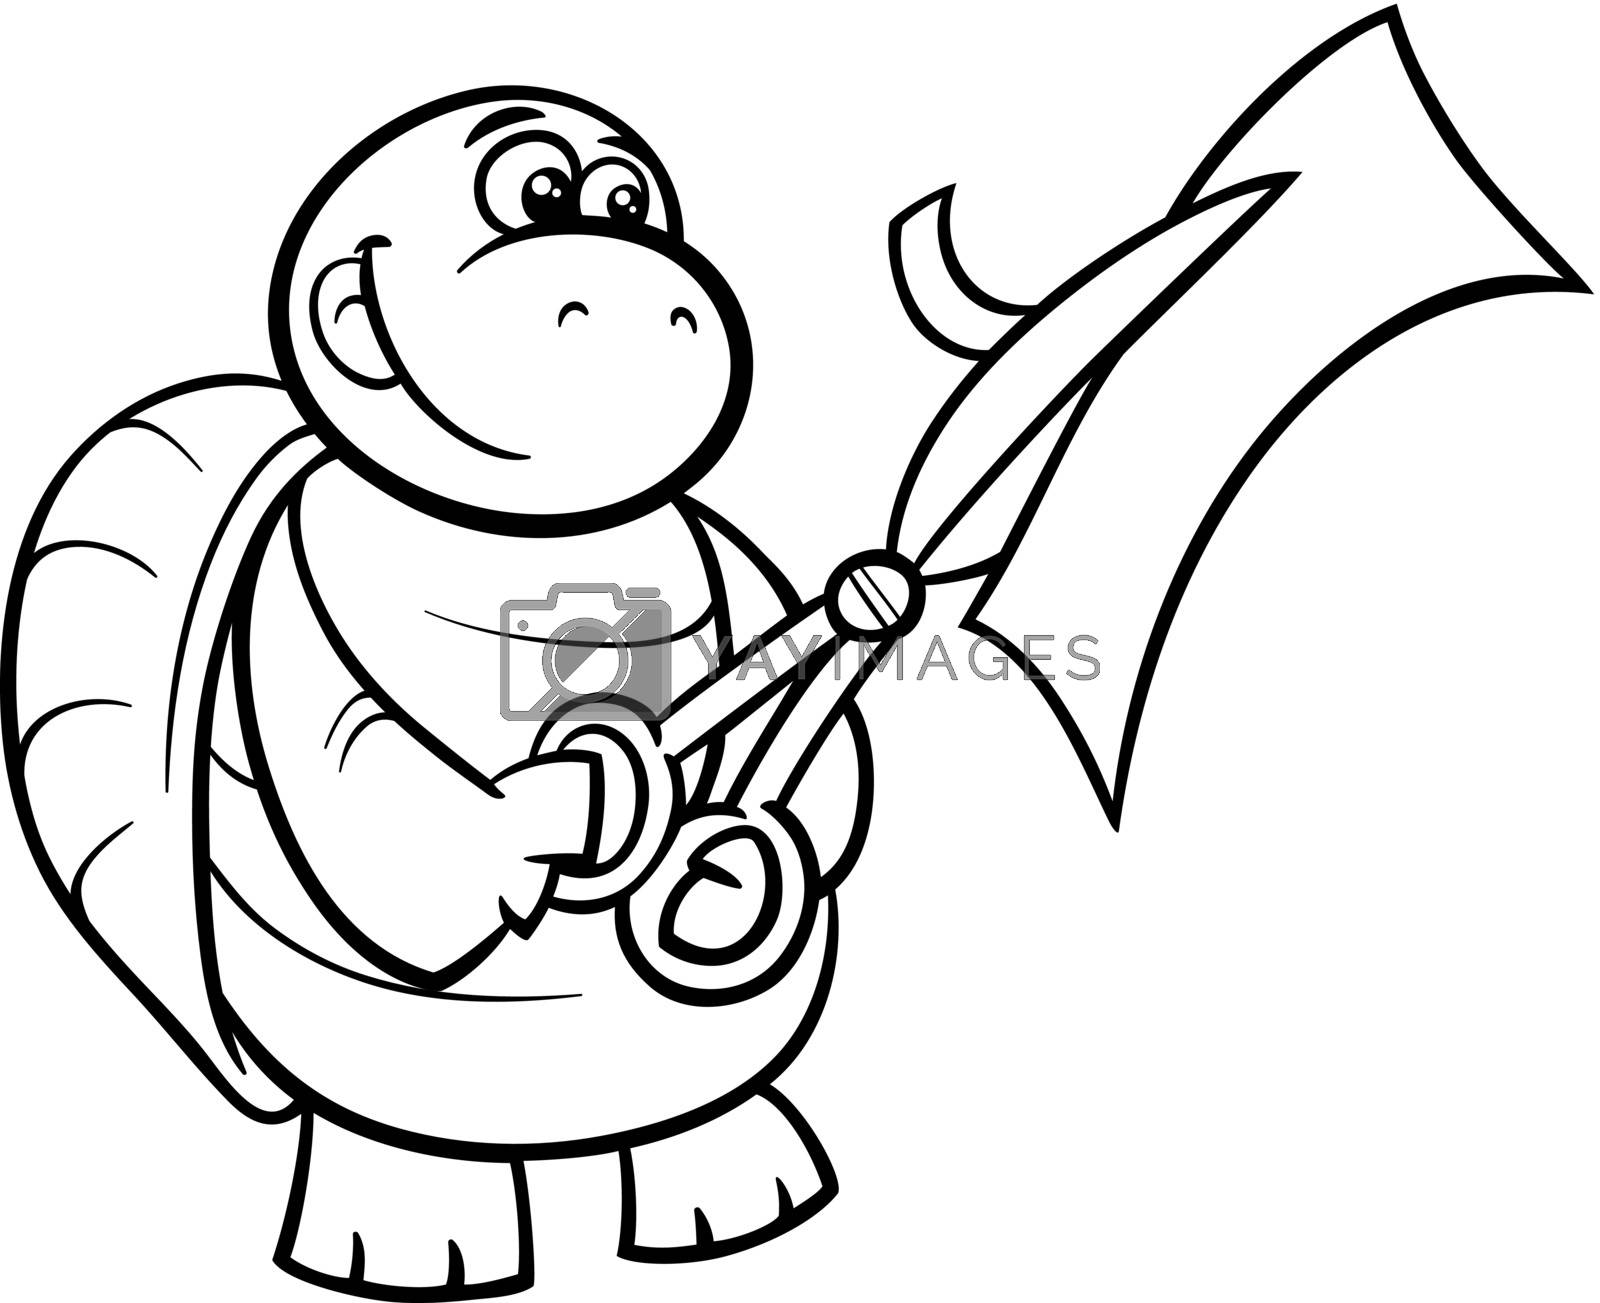 Turtle with scissors coloring page by izakowski vectors illustrations with unlimited downloads